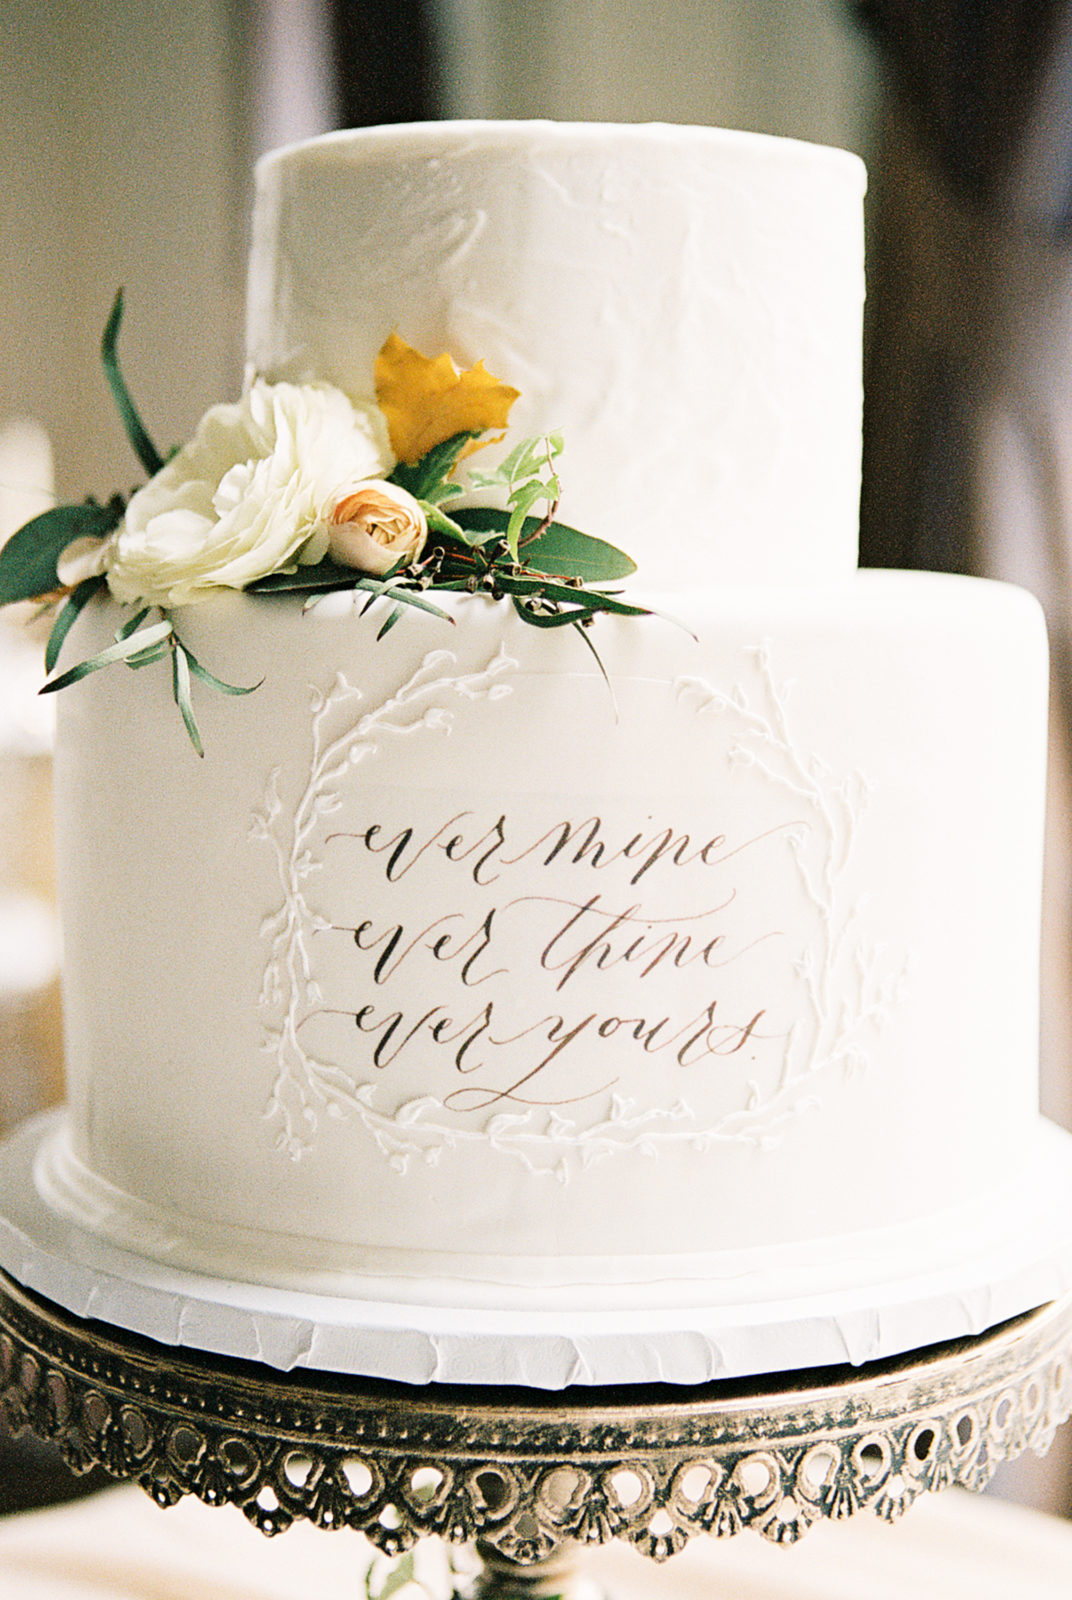 calligraphy cake ever mine ever thine ever yours custom calligraphy